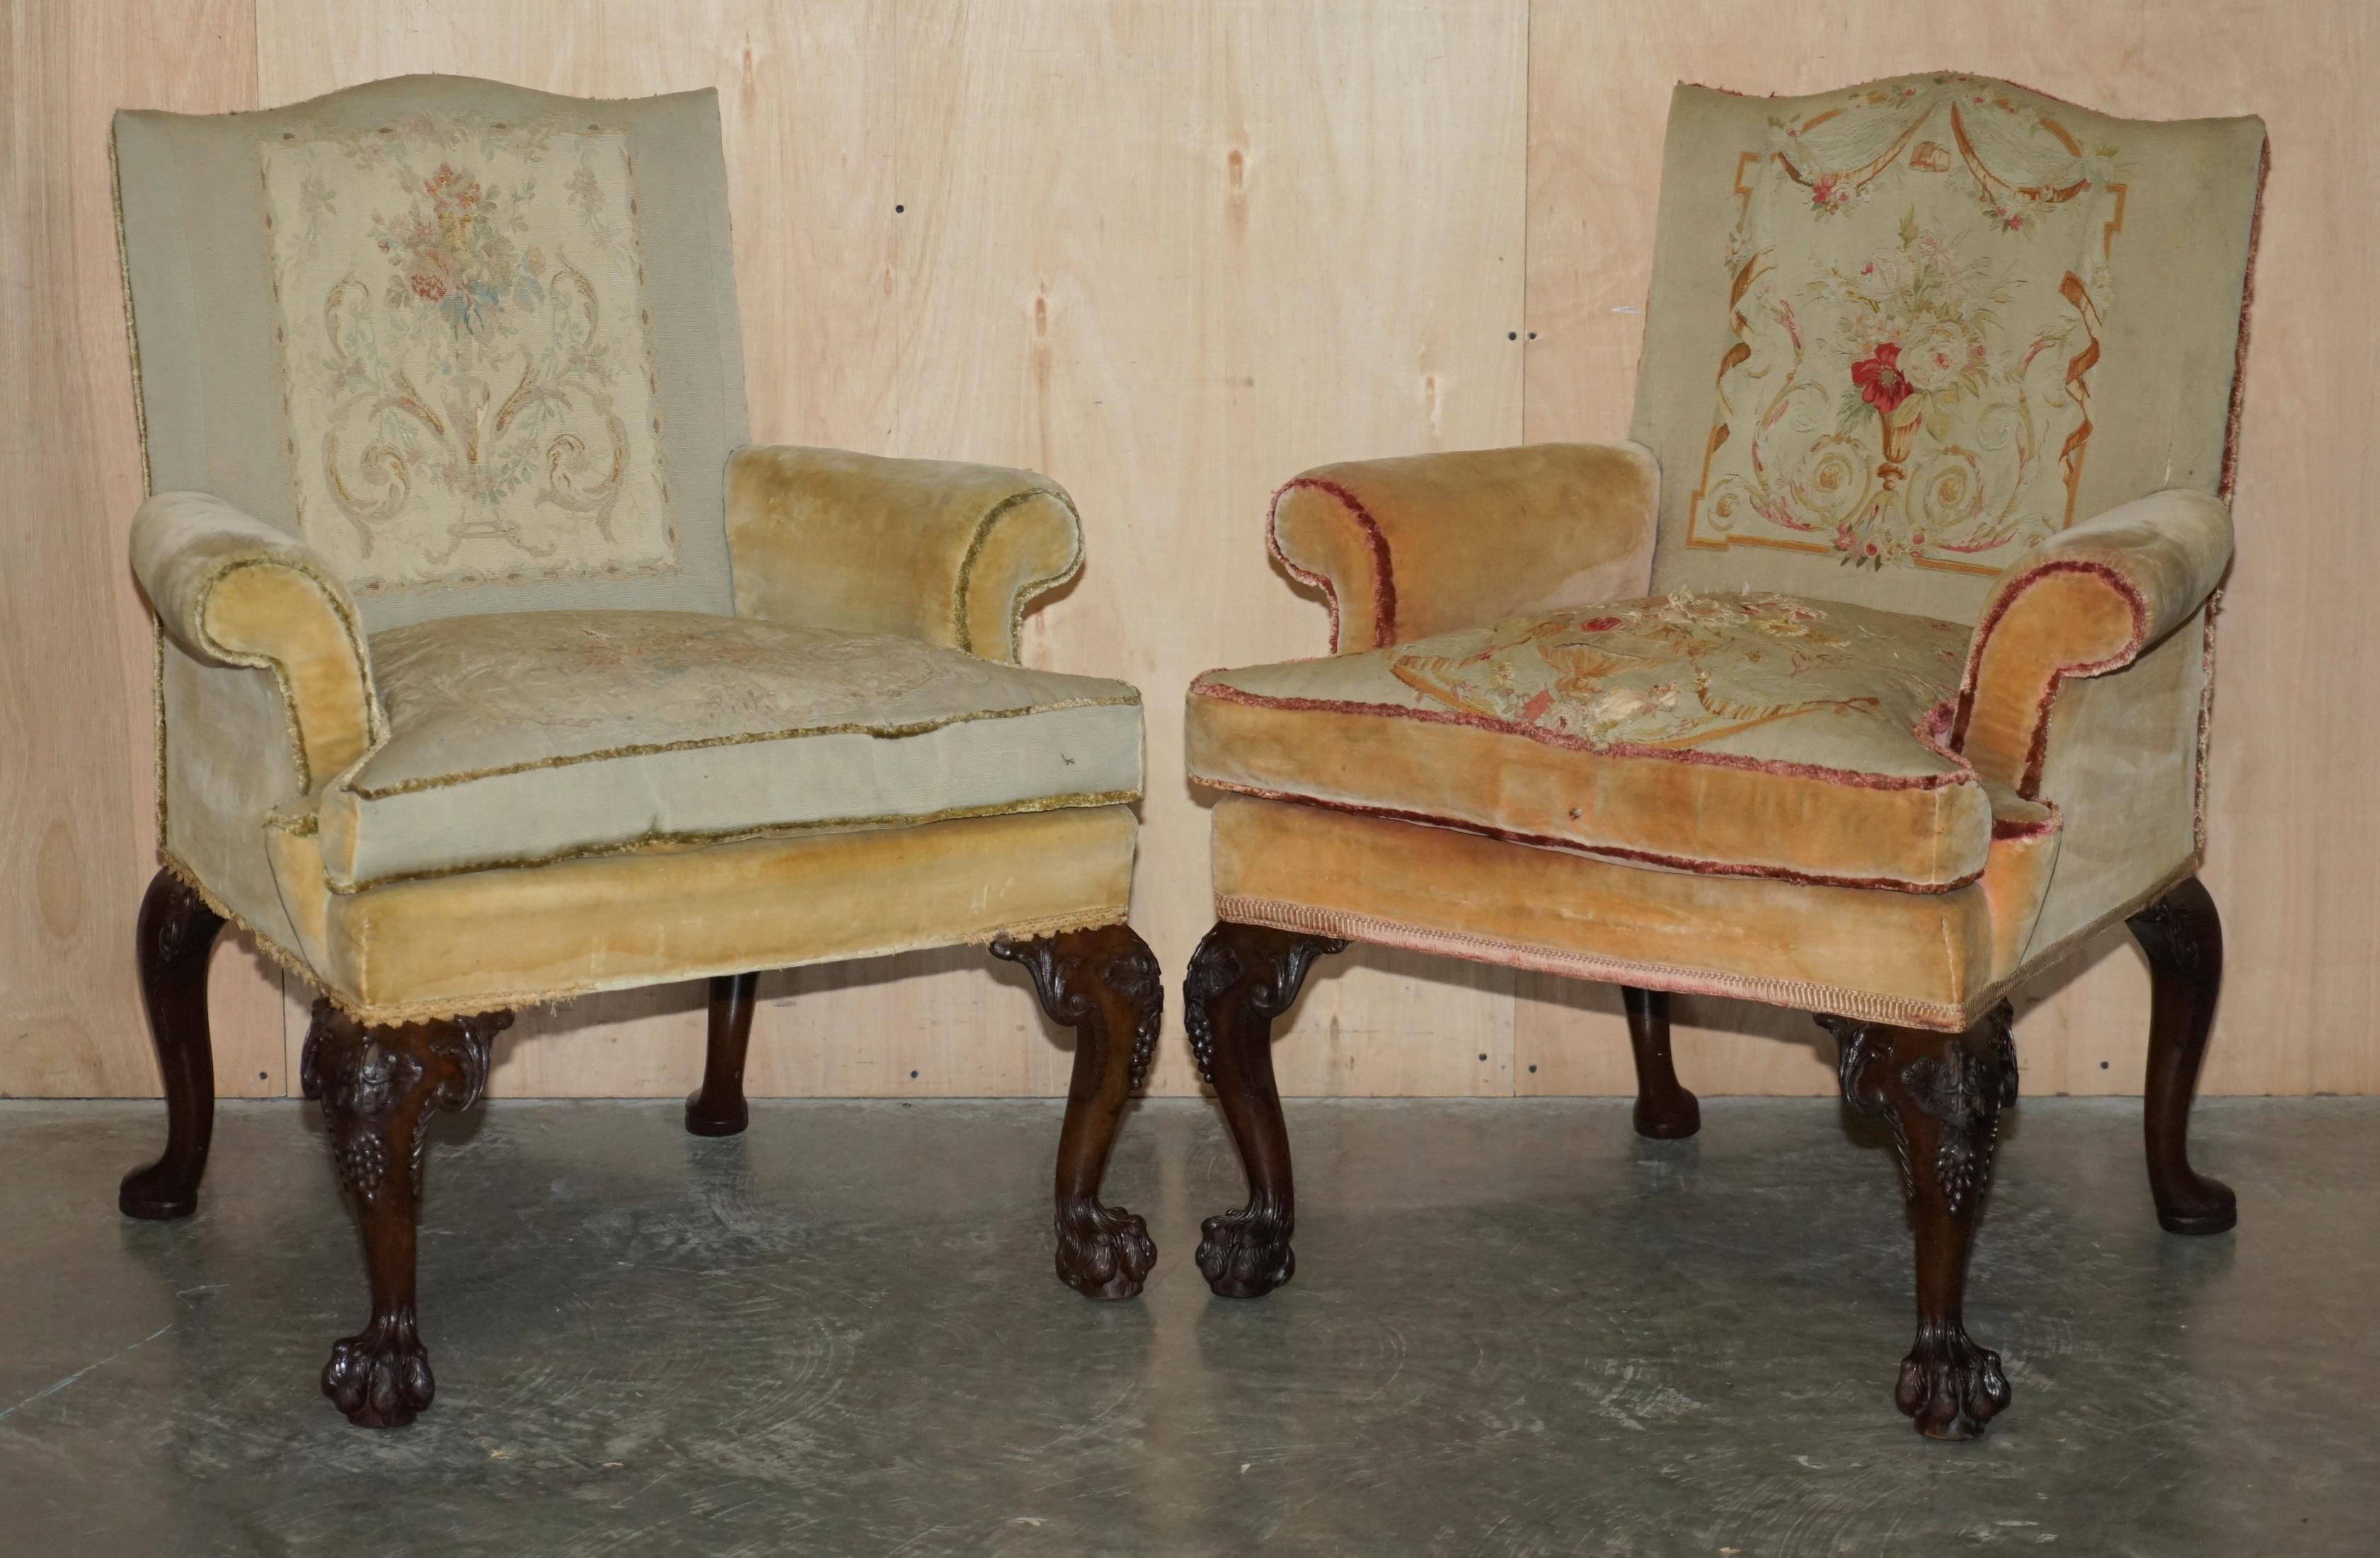 Royal House Antiques

Royal House Antiques is delighted to offer for sale this Important pair of George III circa 1780-1800 hand carved library armchairs with ornate Lions Hairy Paw feet covered in grapevines 

Please note the delivery fee listed is